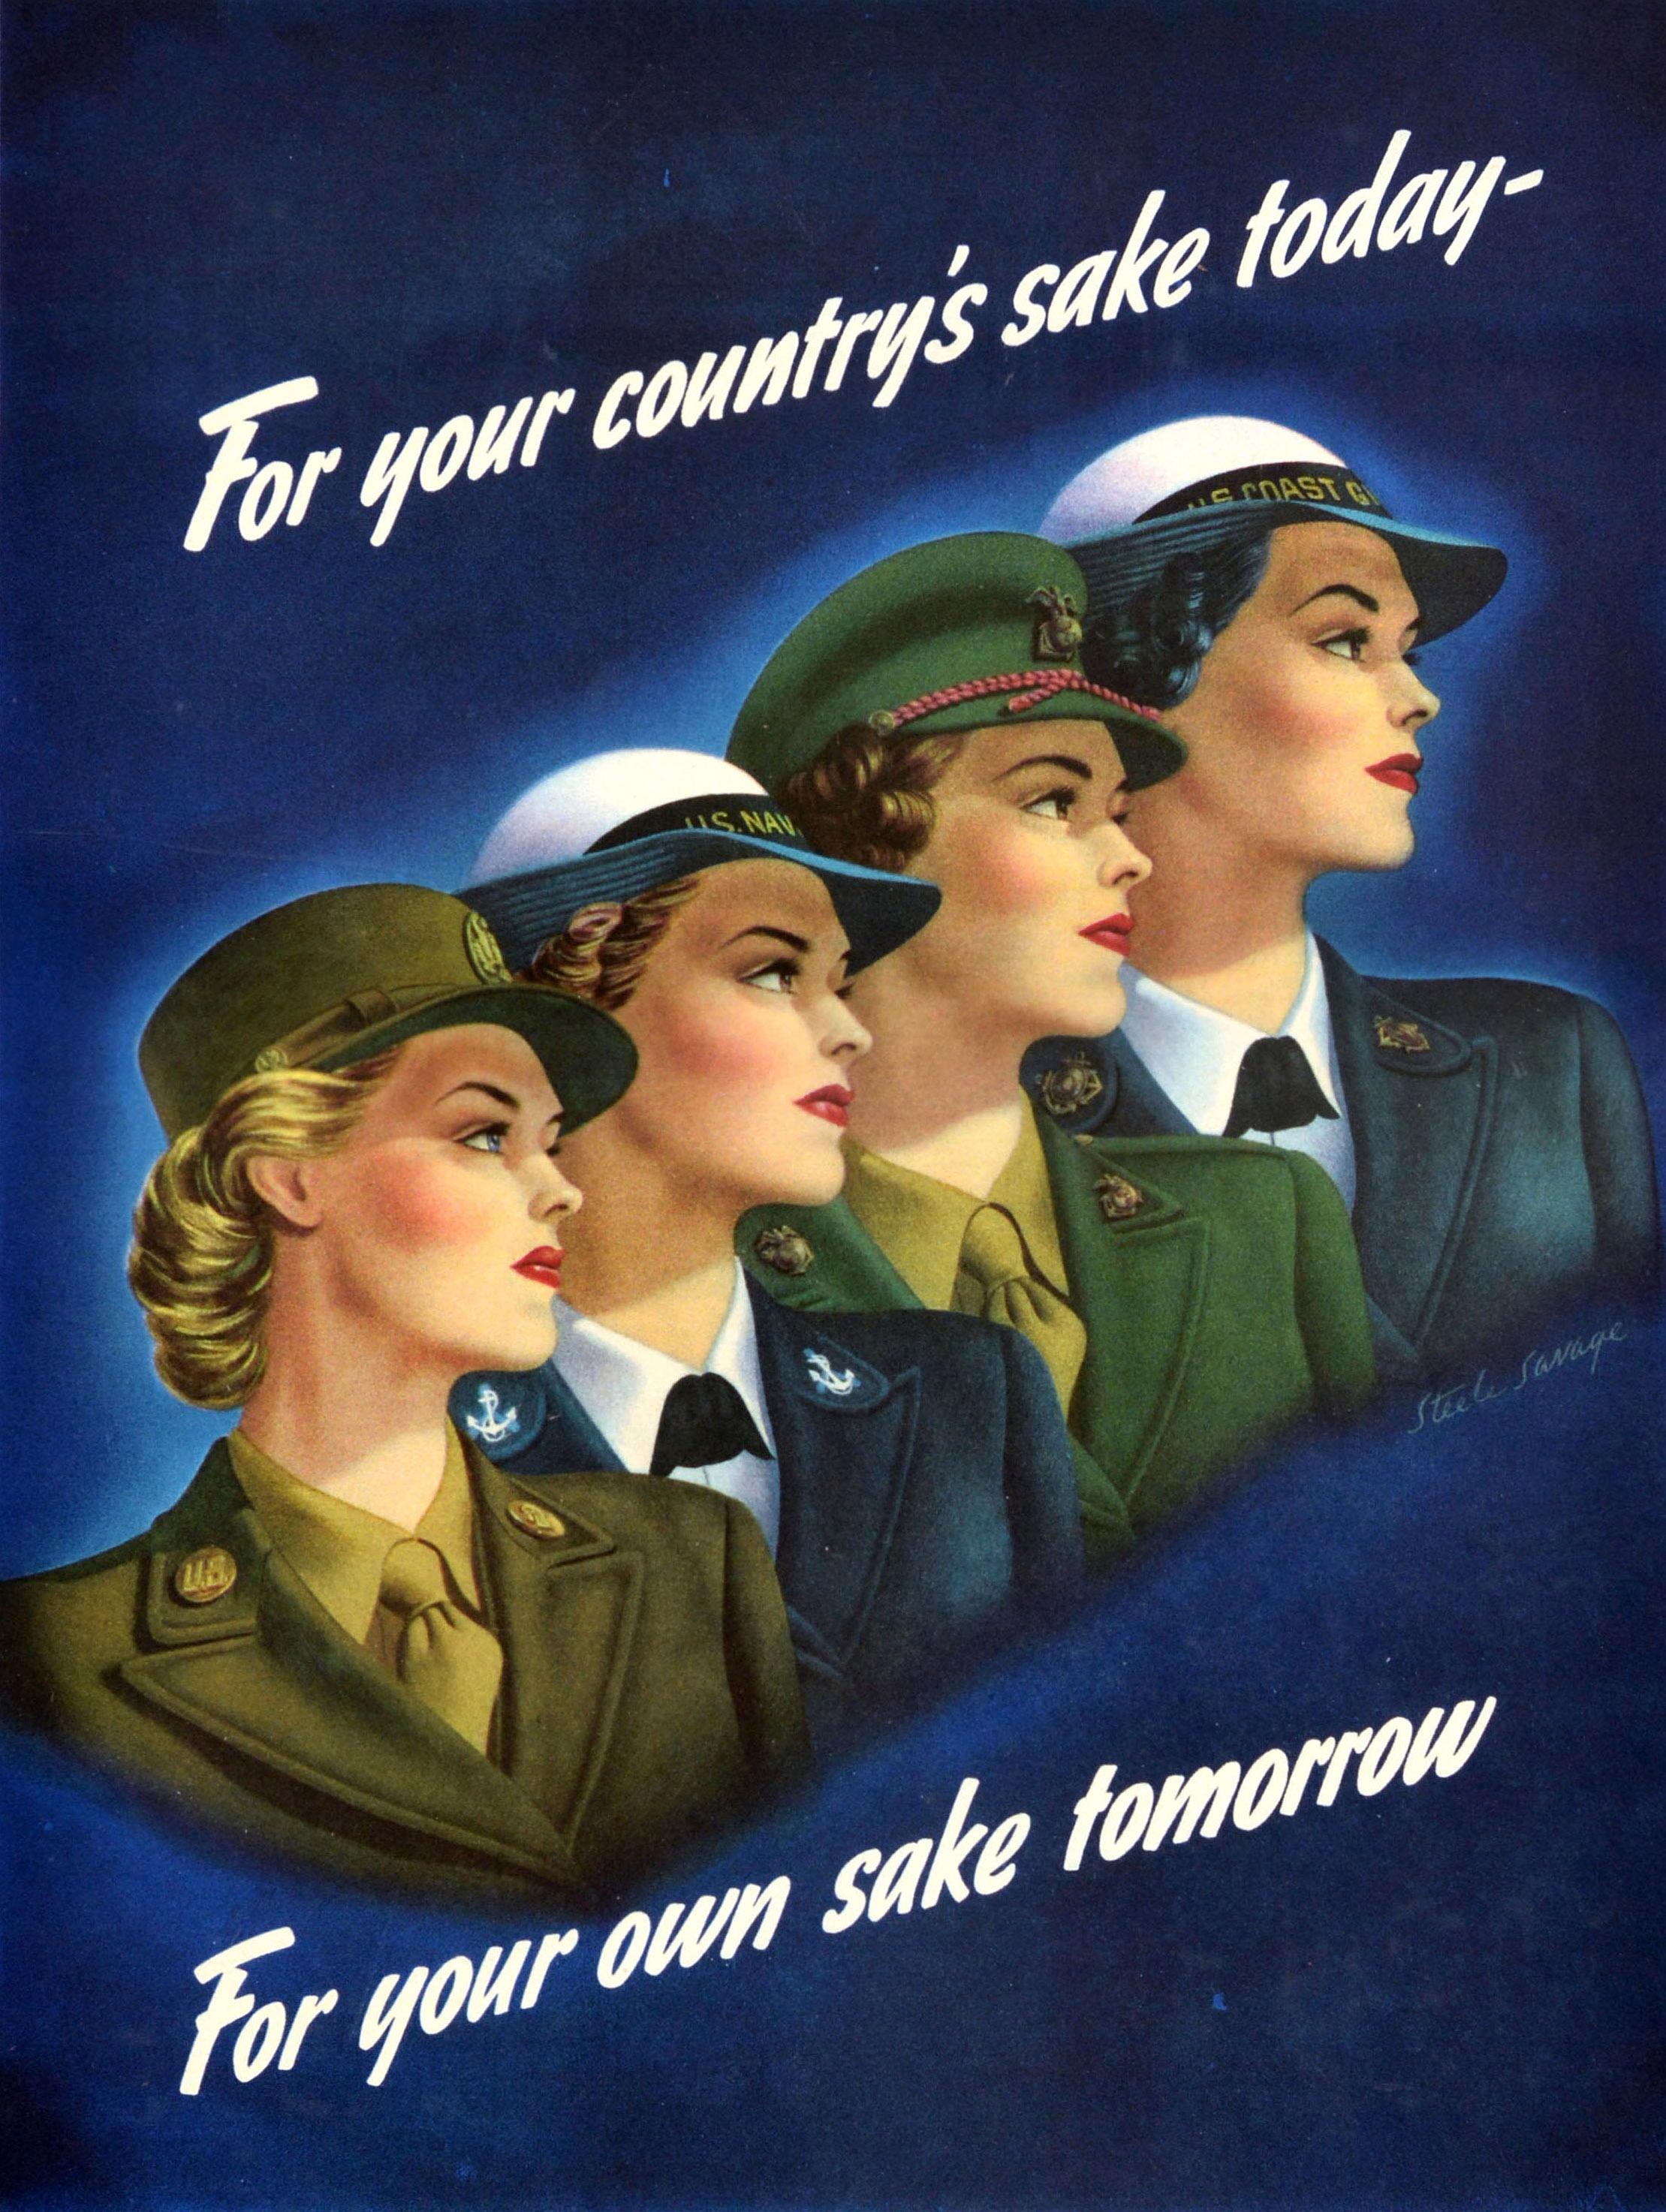 Original vintage American World War Two recruitment poster - For your country's sake today For your own sake tomorrow Go to the nearest recruiting station of the armed service of your choice - featuring a stunning illustration by Harry Steele Savage